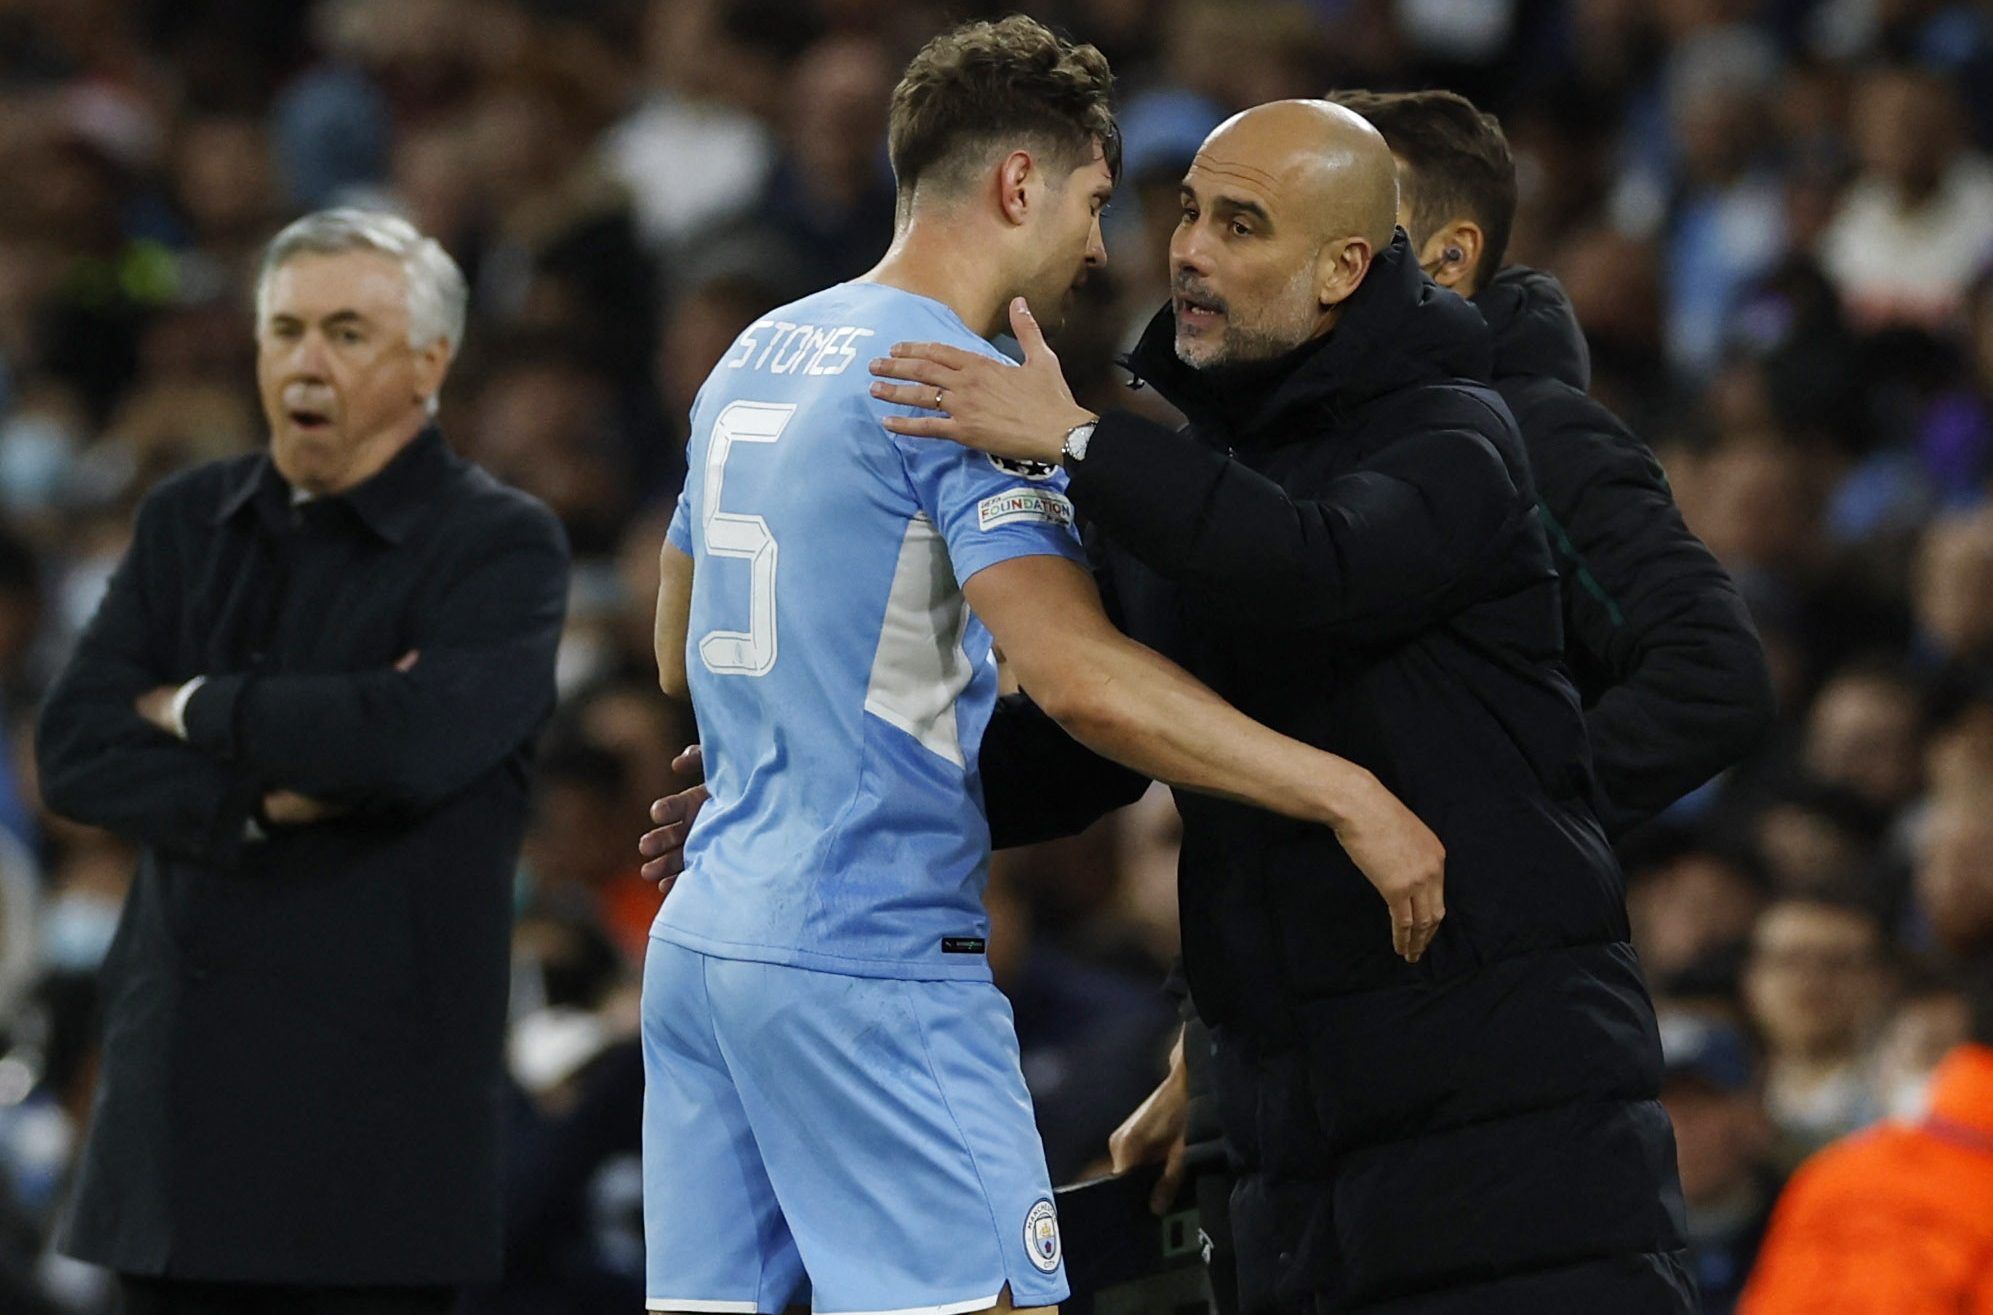 Soccer Football - Champions League - Semi Final - First Leg - Manchester City v Real Madrid - Etihad Stadium, Manchester, Britain - April 26, 2022 Manchester City manager Pep Guardiola with John Stones who comes off as a substitute Action Images via Reuters/Jason Cairnduff